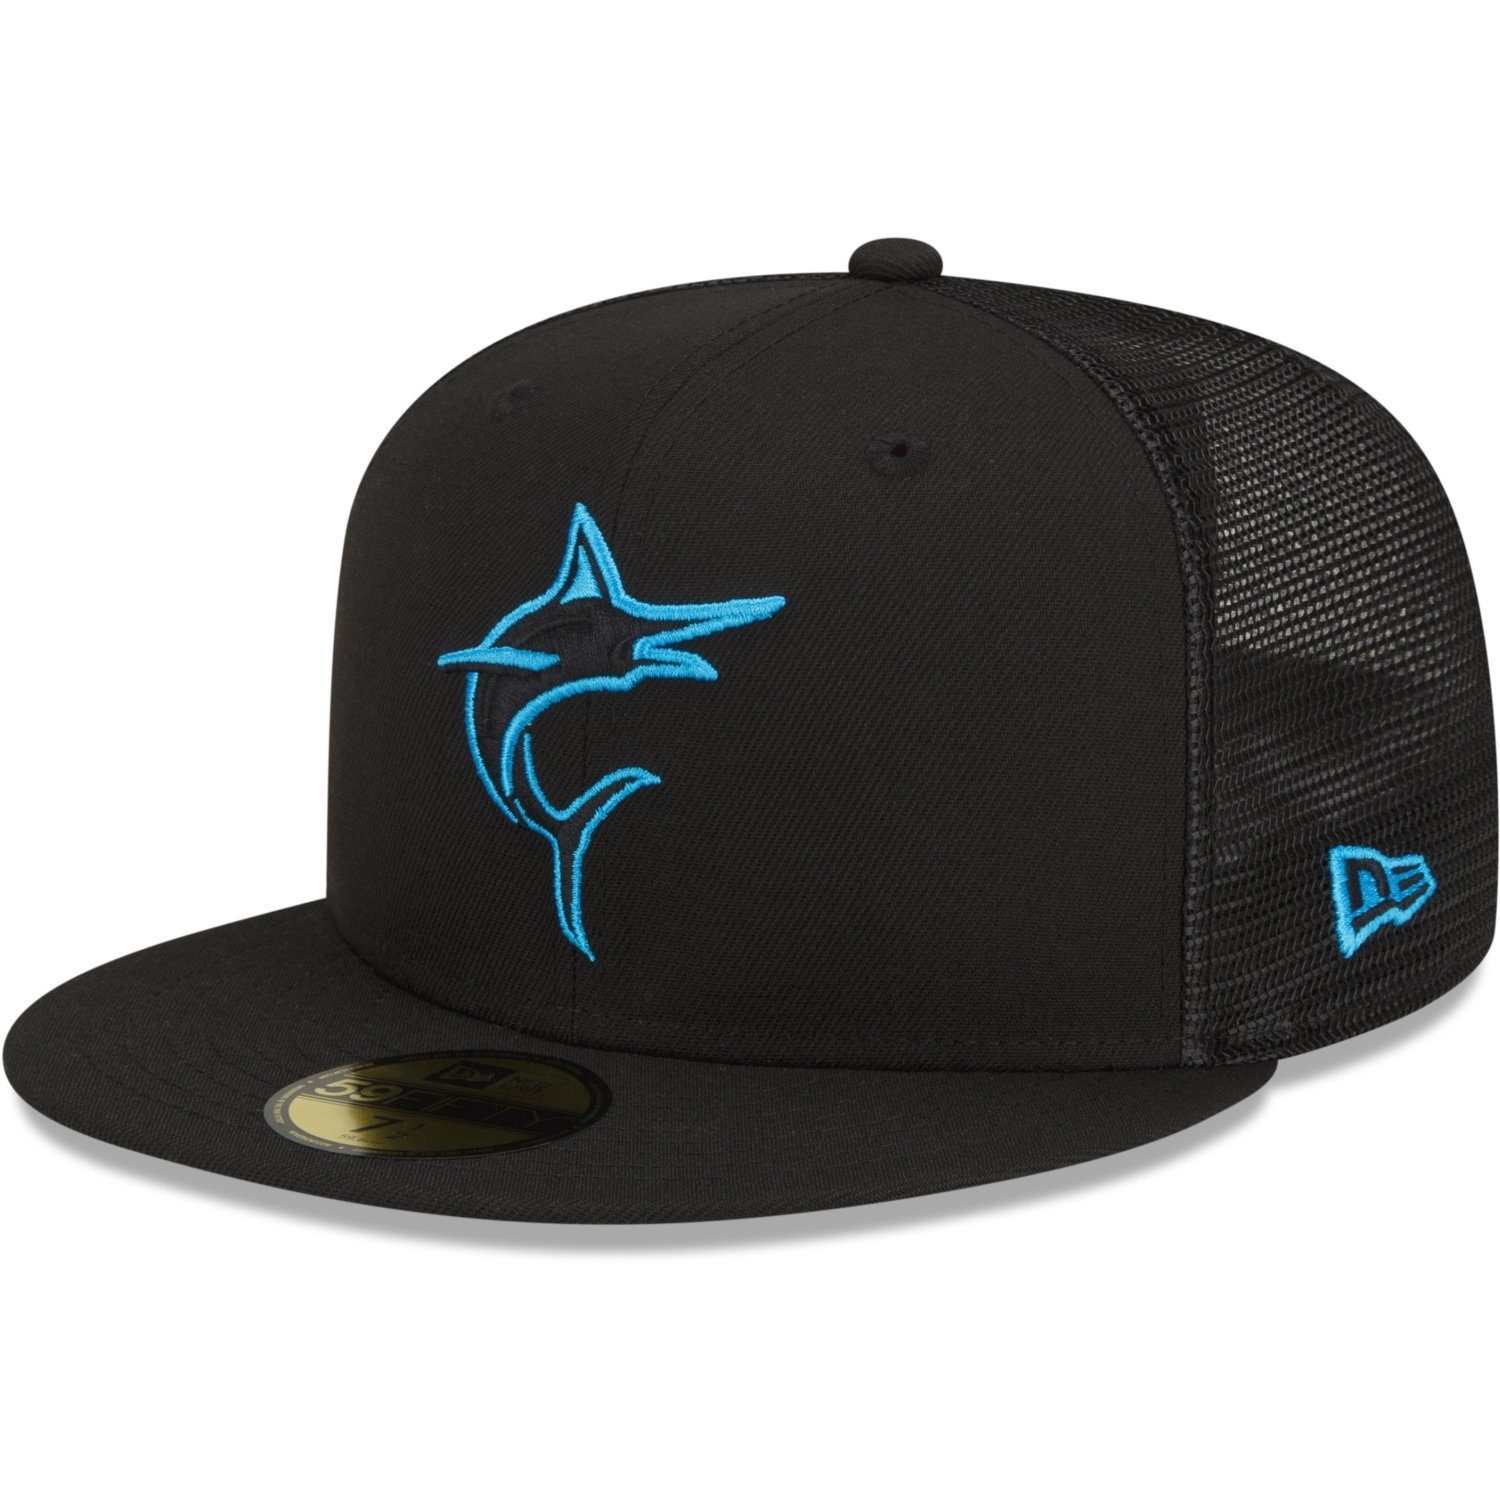 New BATTING Marlins Cap PRACTICE Fitted Miami 59Fifty Era